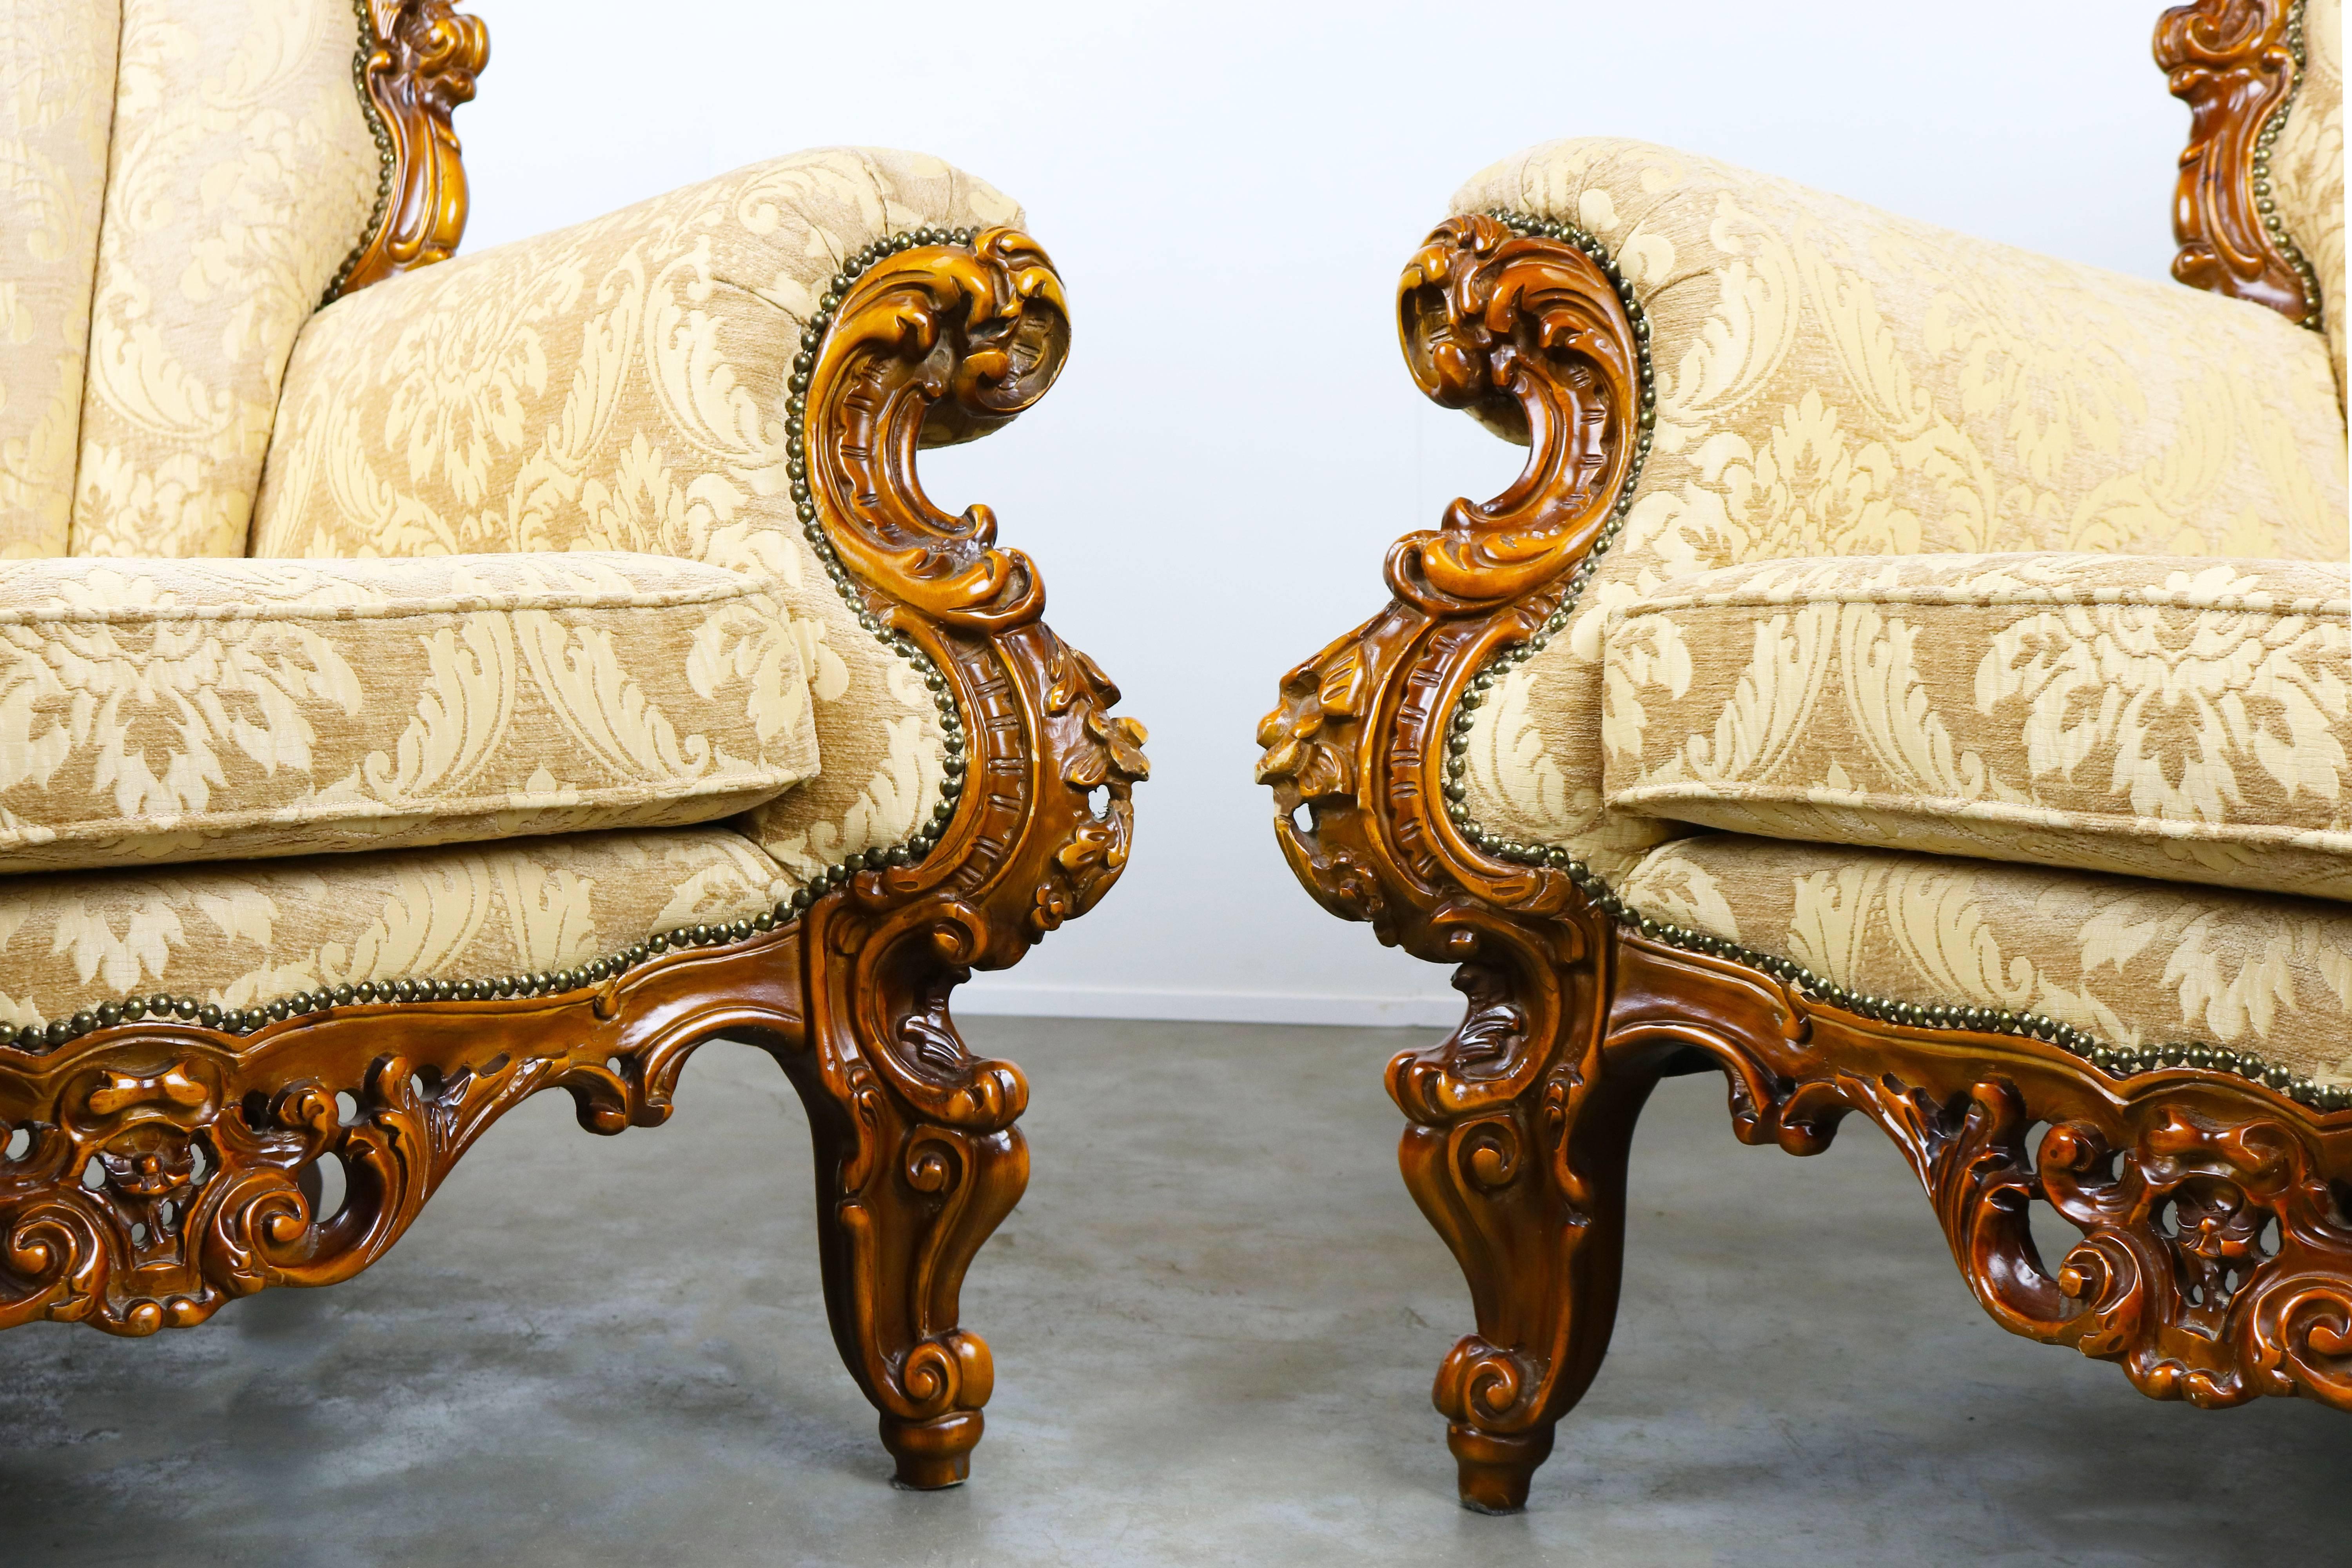 Luxurious Antique Italian Lounge Chairs in Rococo / Baroque Style Brown Beige For Sale 3